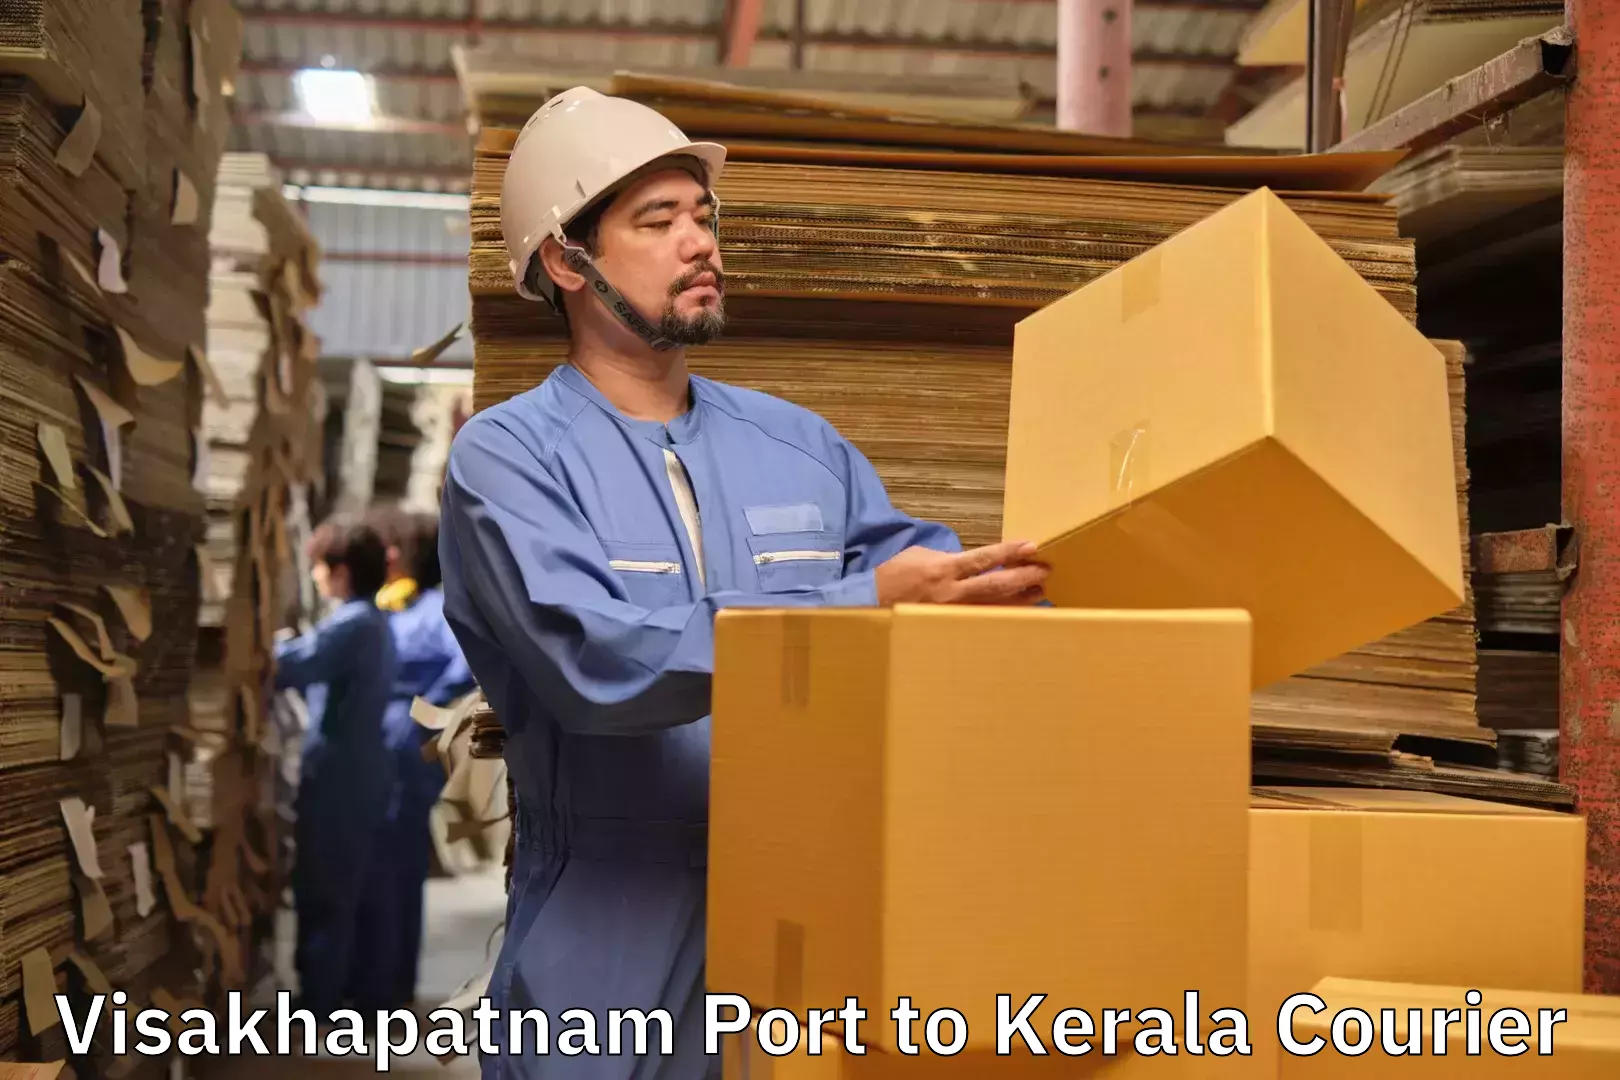 Reliable luggage courier Visakhapatnam Port to Kottayam